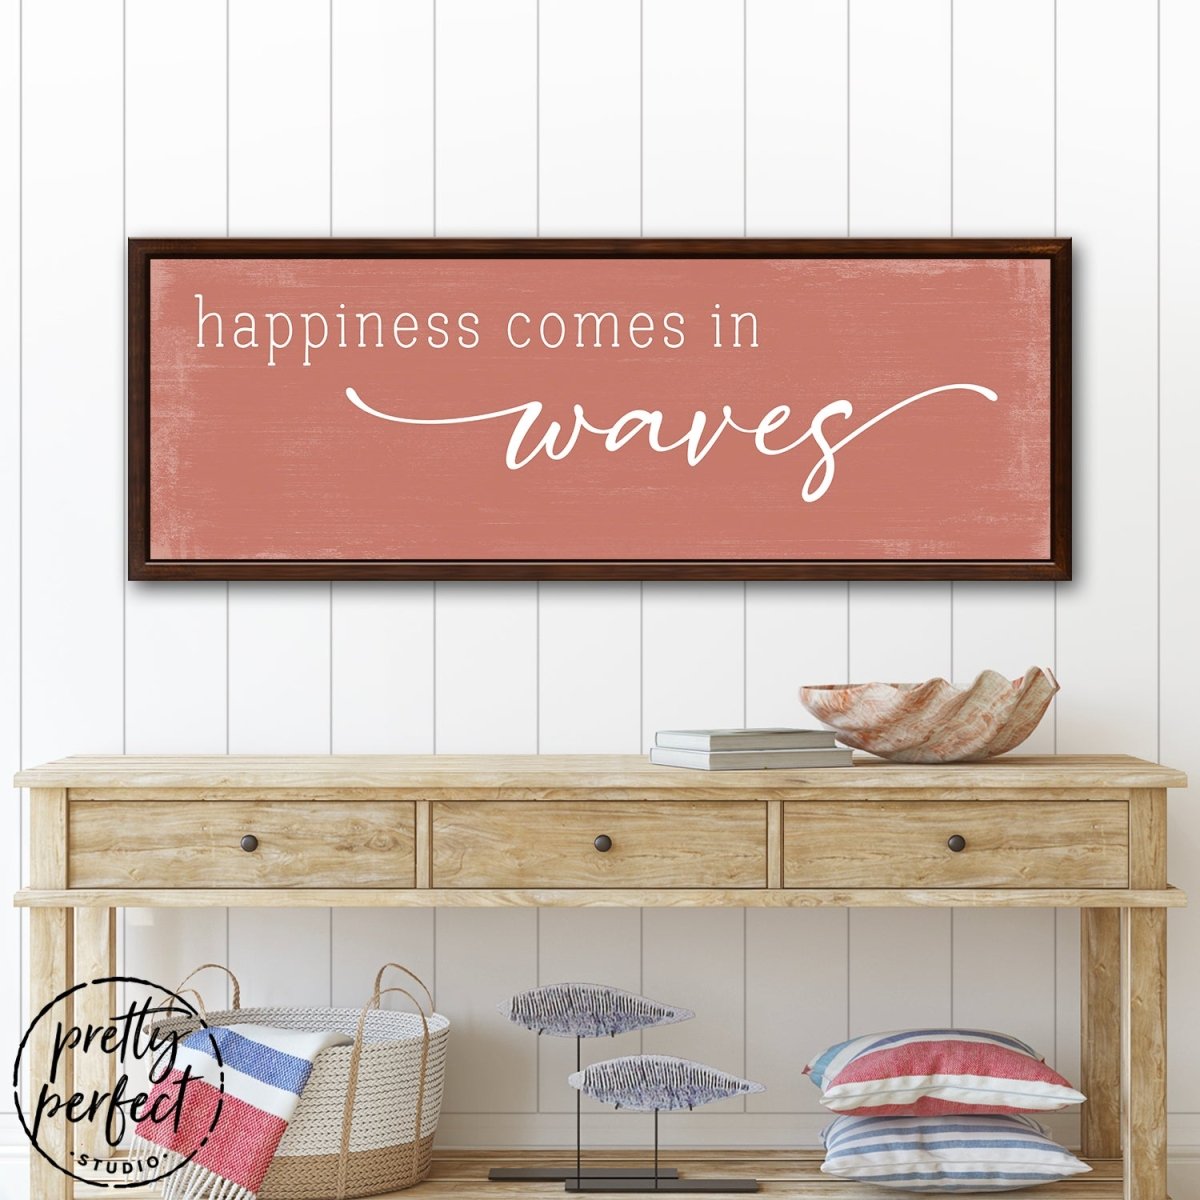 Happiness Comes in Waves Sign Hanging on Wall Above Entryway Table - Pretty Perfect Studio